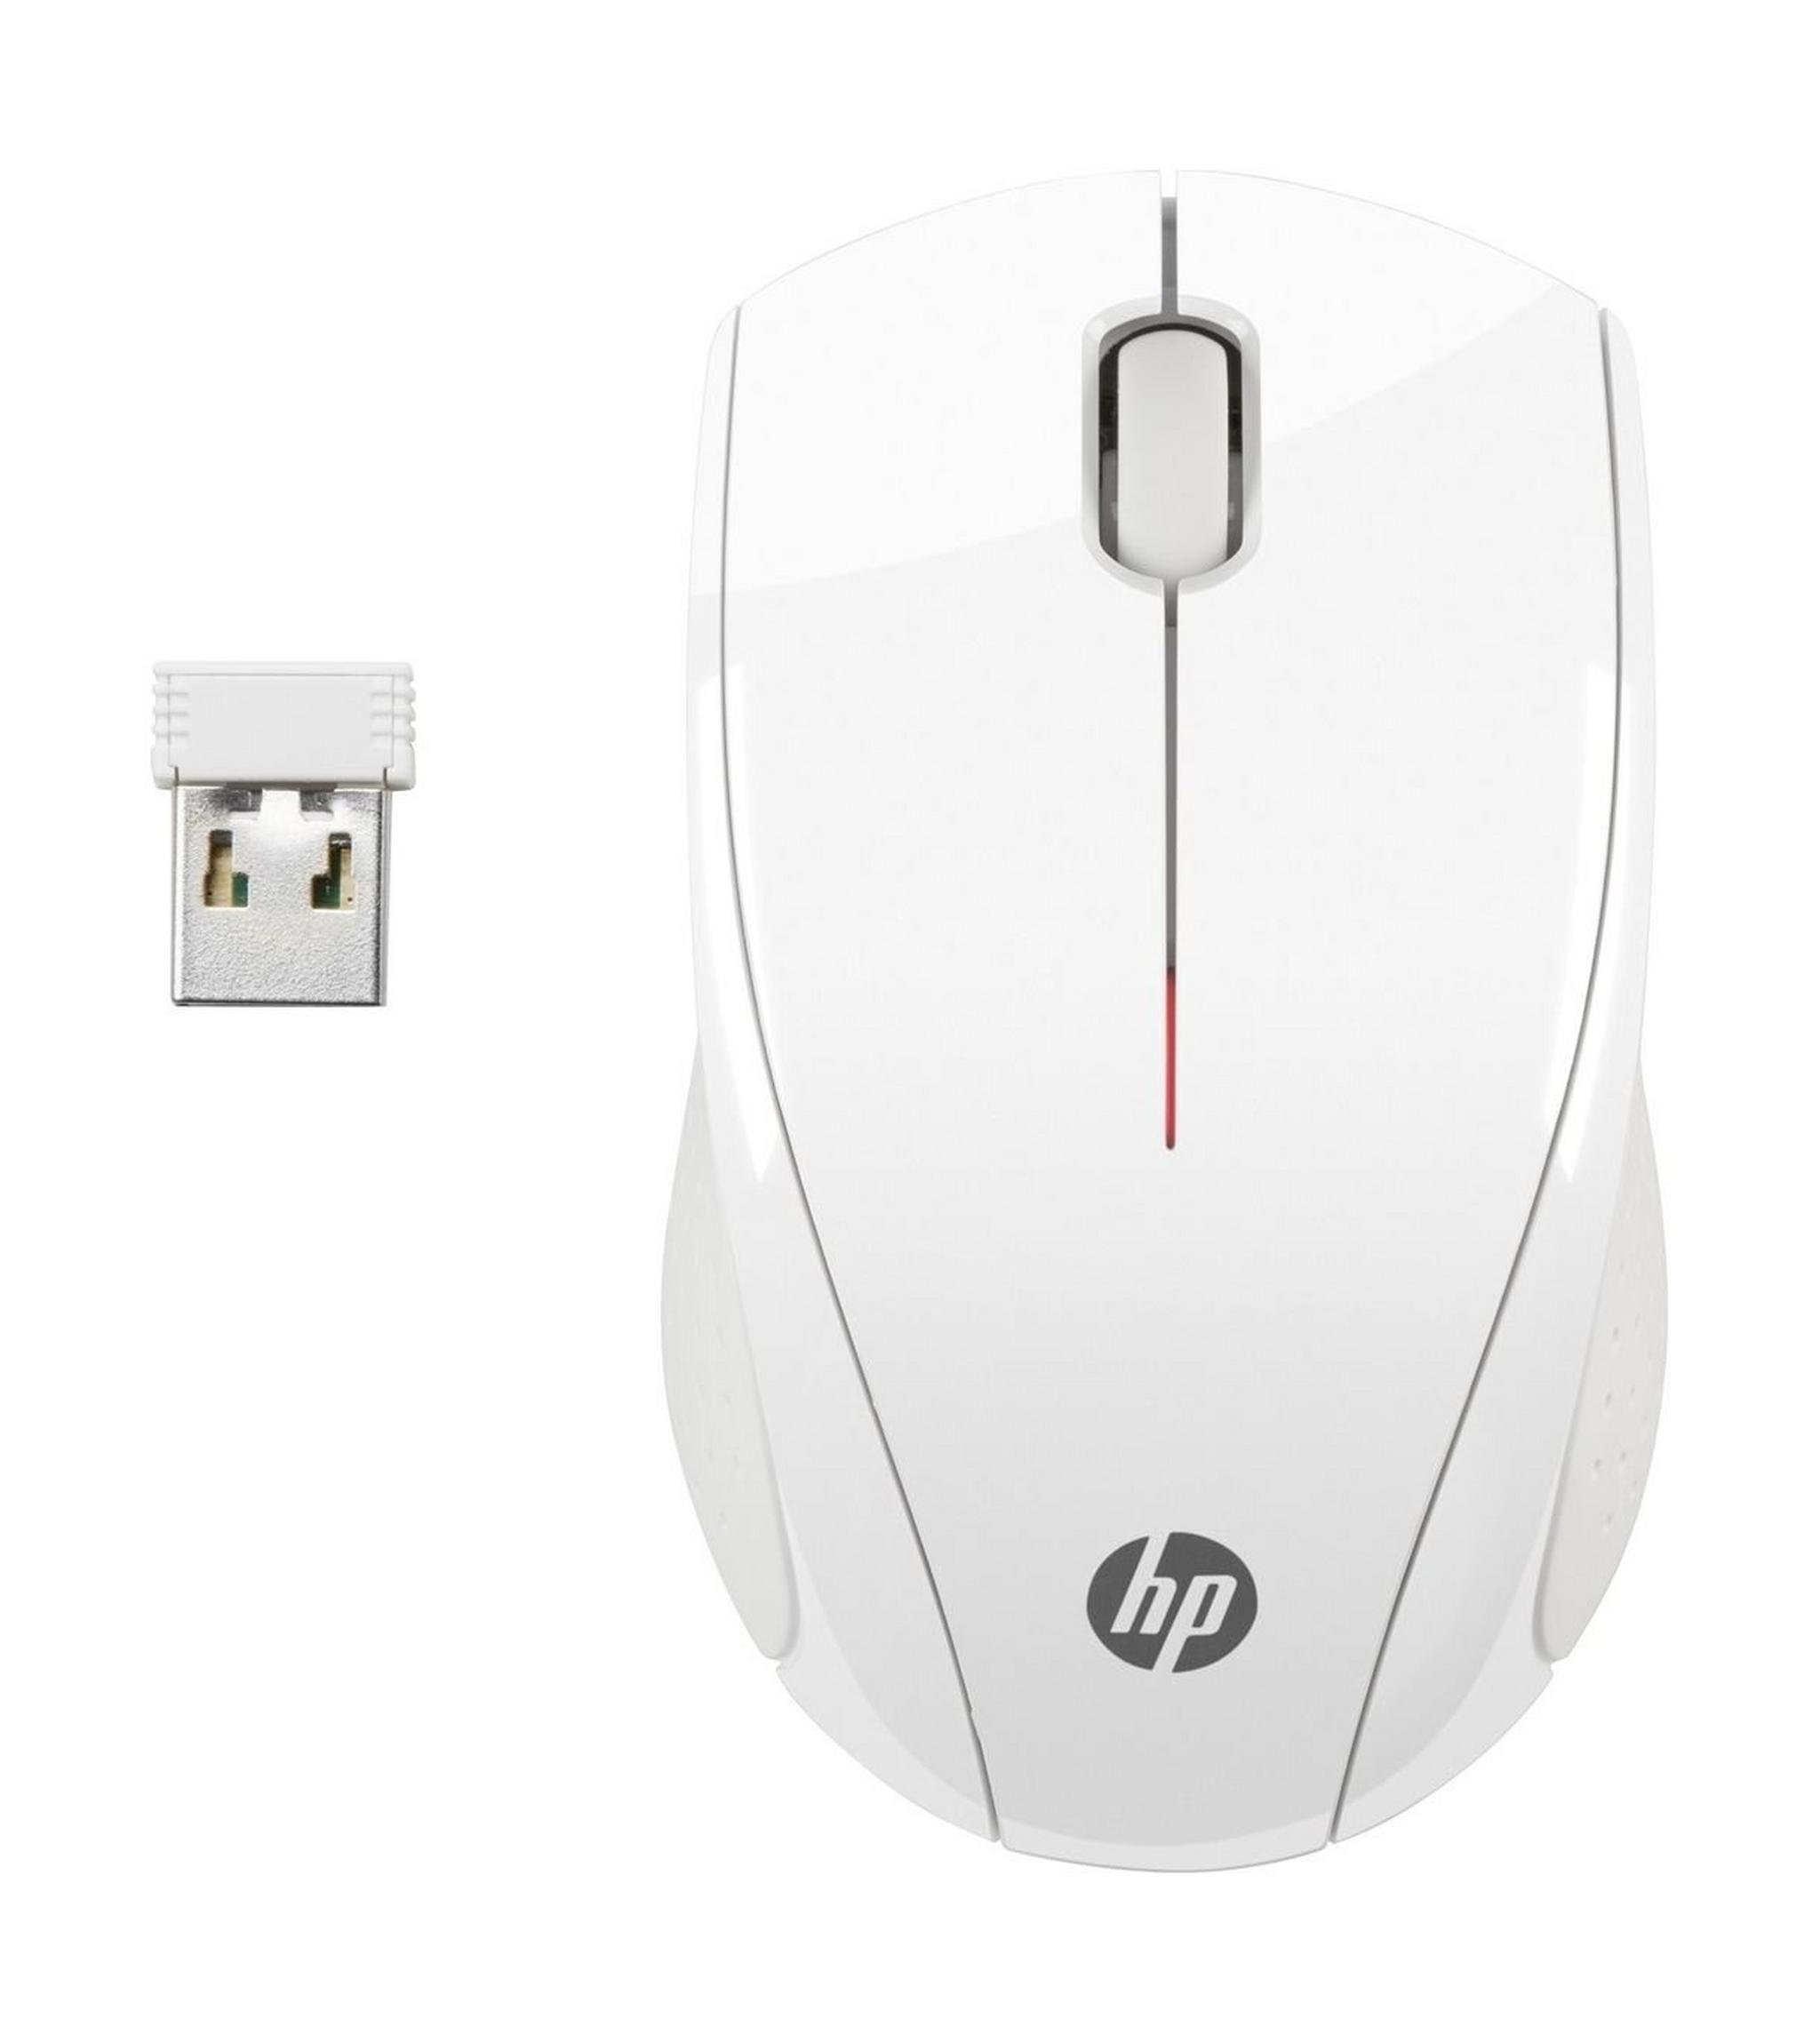 HP X3000 Blizzard Wireless Mouse (N4G64AA) – White